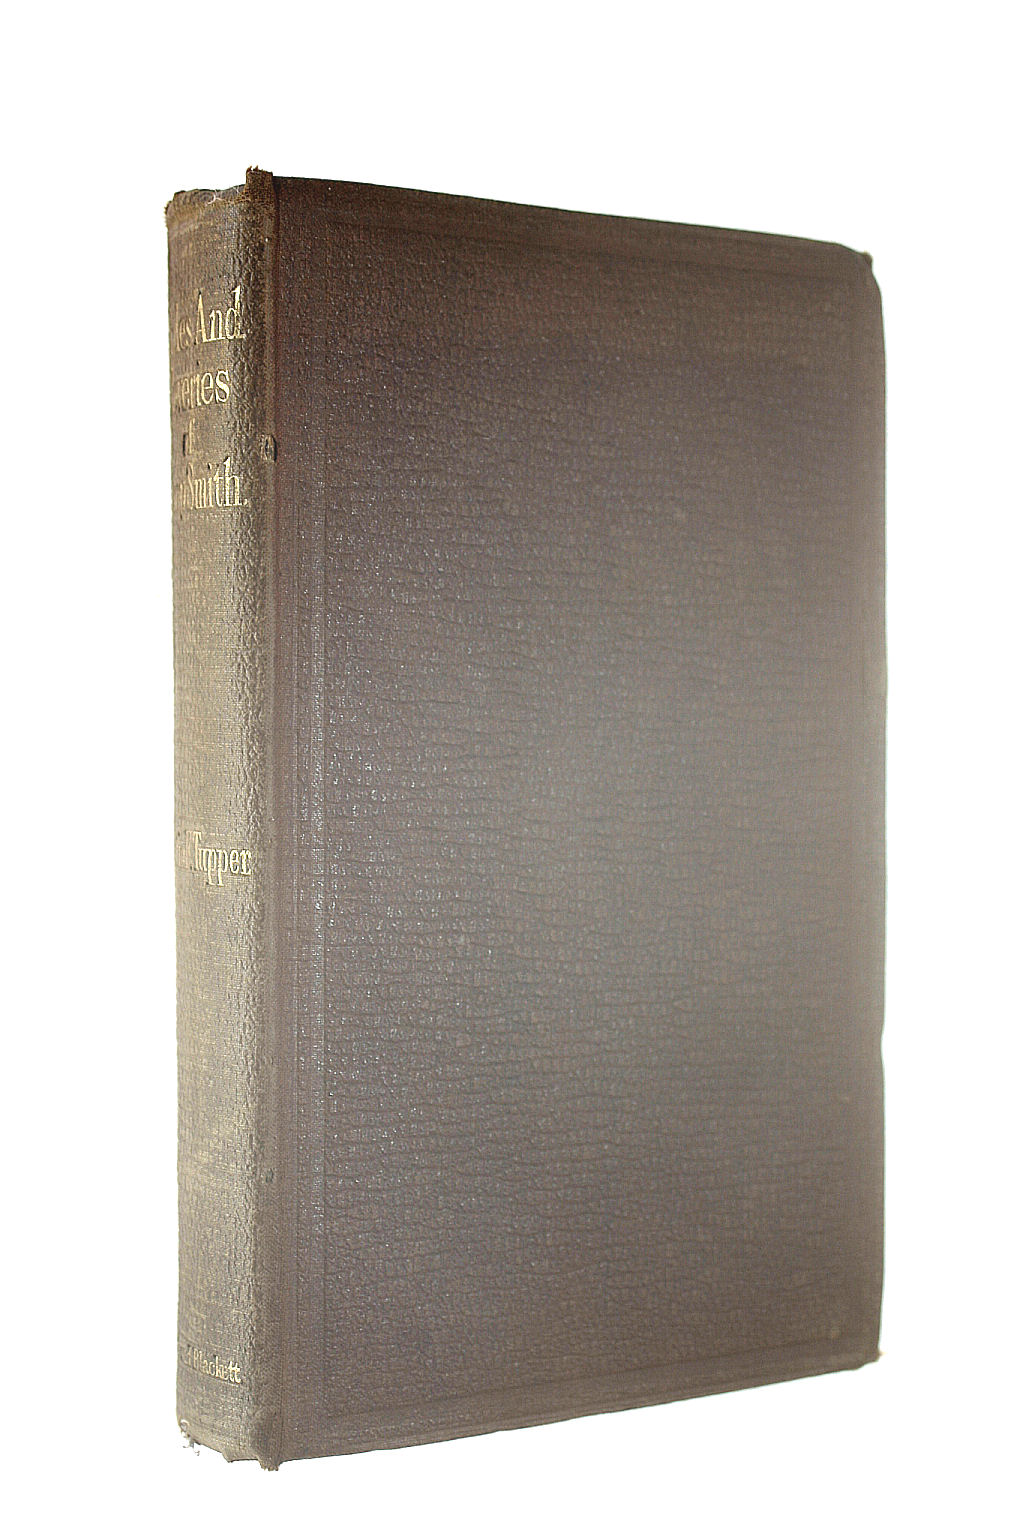 SMITH. MR. AESOP - Rides and Reveries of the Late Mr. Aesop Smith. Edited By Peter Query, Fsa (Martin F. Tupper)